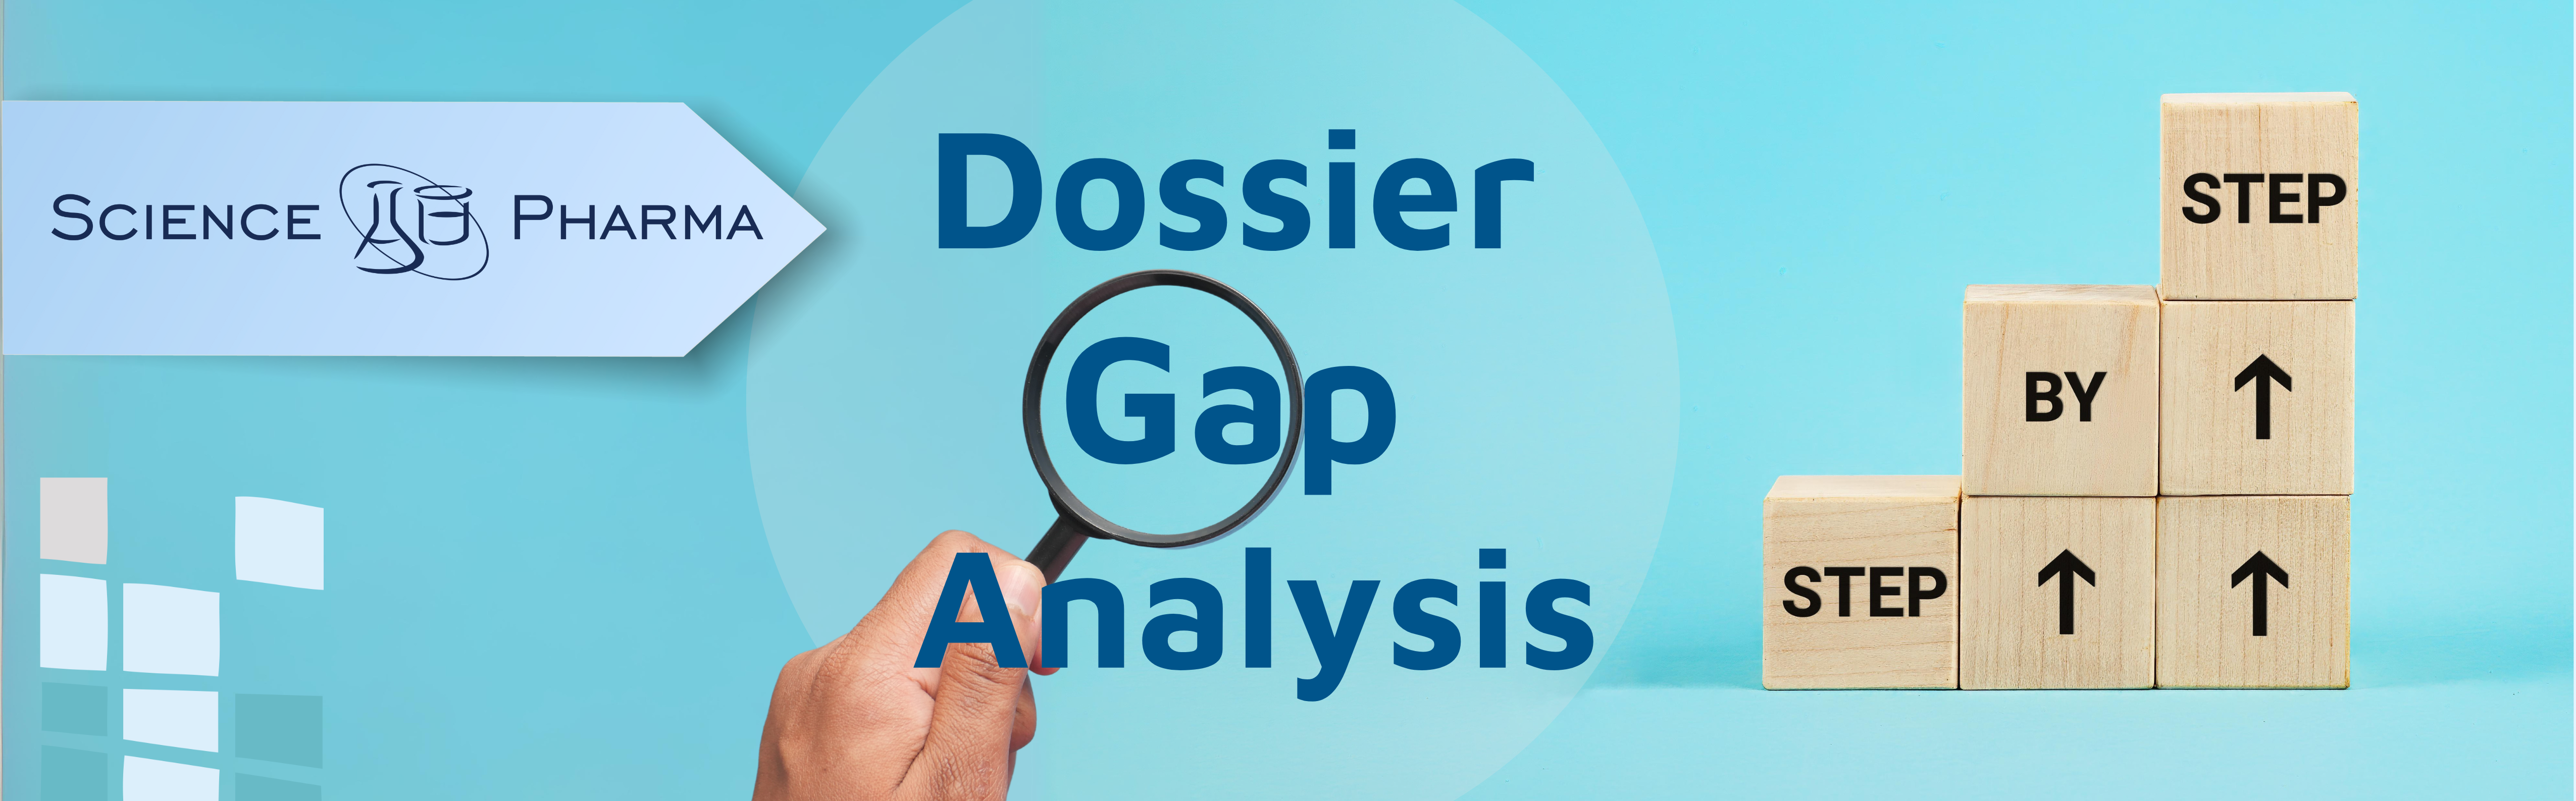 Image of the text 'Dossier Gap Analysis' magnified under a magnifying glass, with step-by-step blocks arranged below. The magnifying glass highlights the focus on analyzing gaps in a dossier, while the step-by-step blocks represent a structured approach to addressing and resolving these gaps.